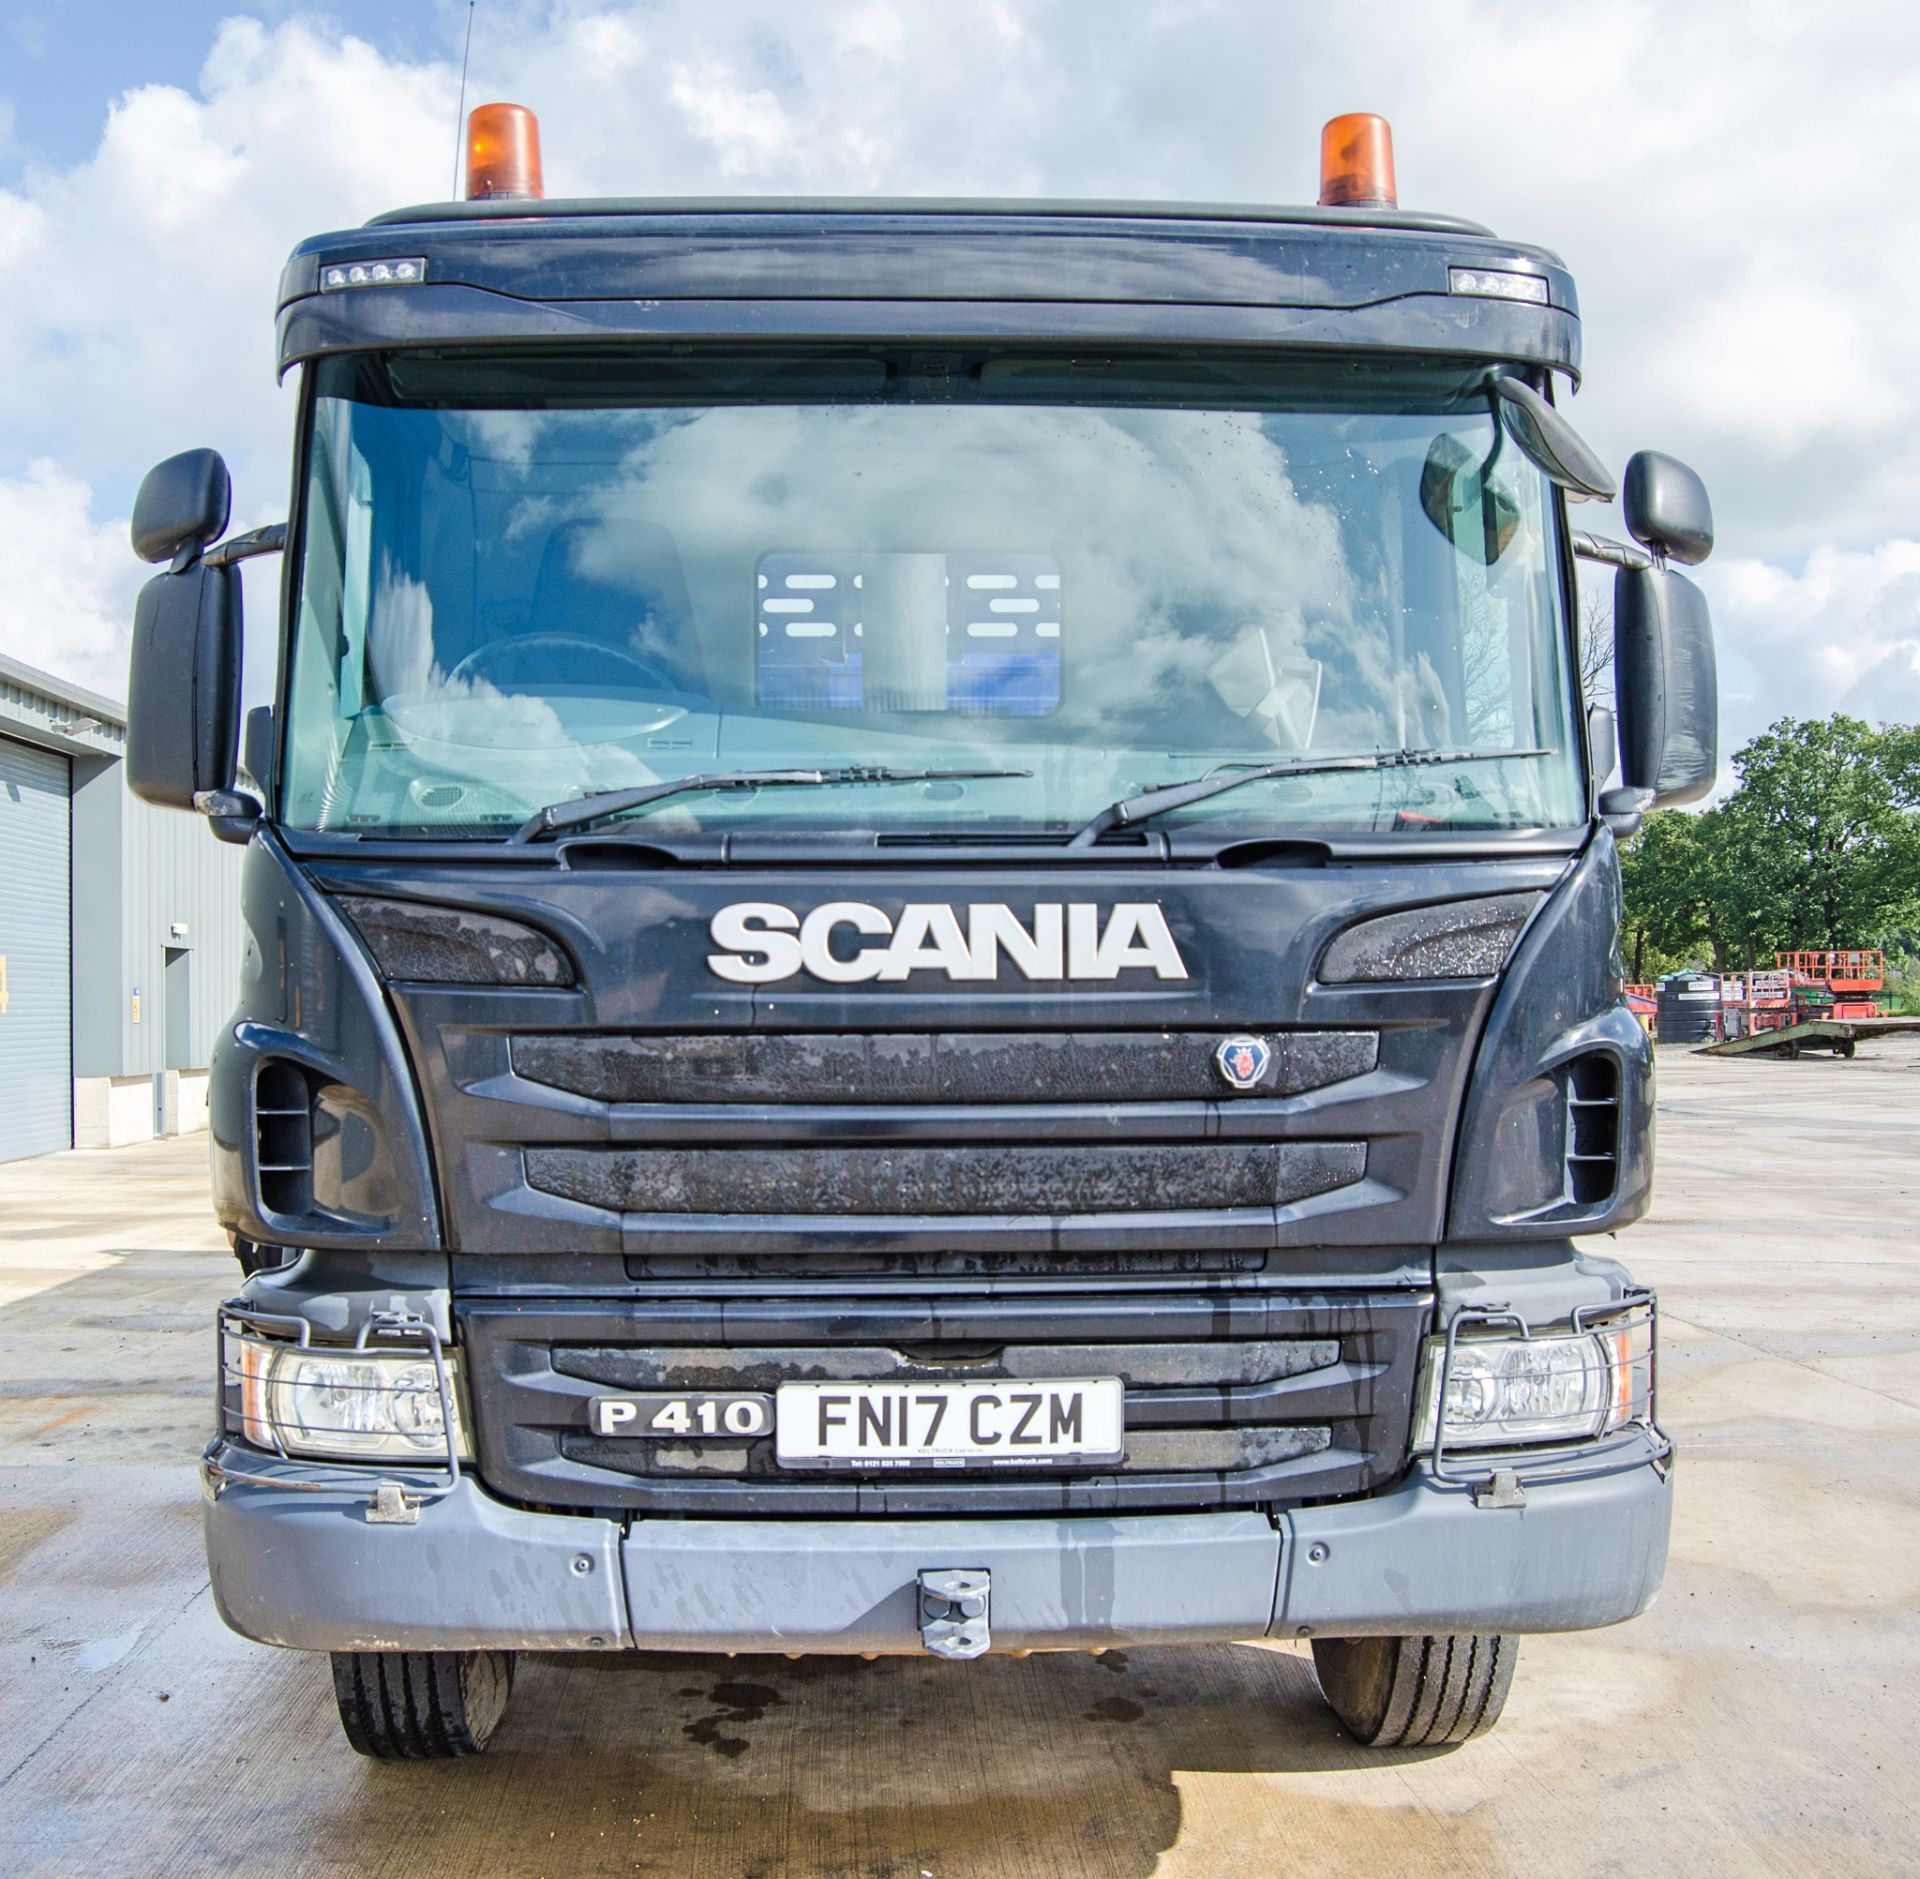 Scania P410 C-Class 8x4 32 tonne tipper lorry Registration Number: FN17 CZM Date of Registration: - Image 5 of 31